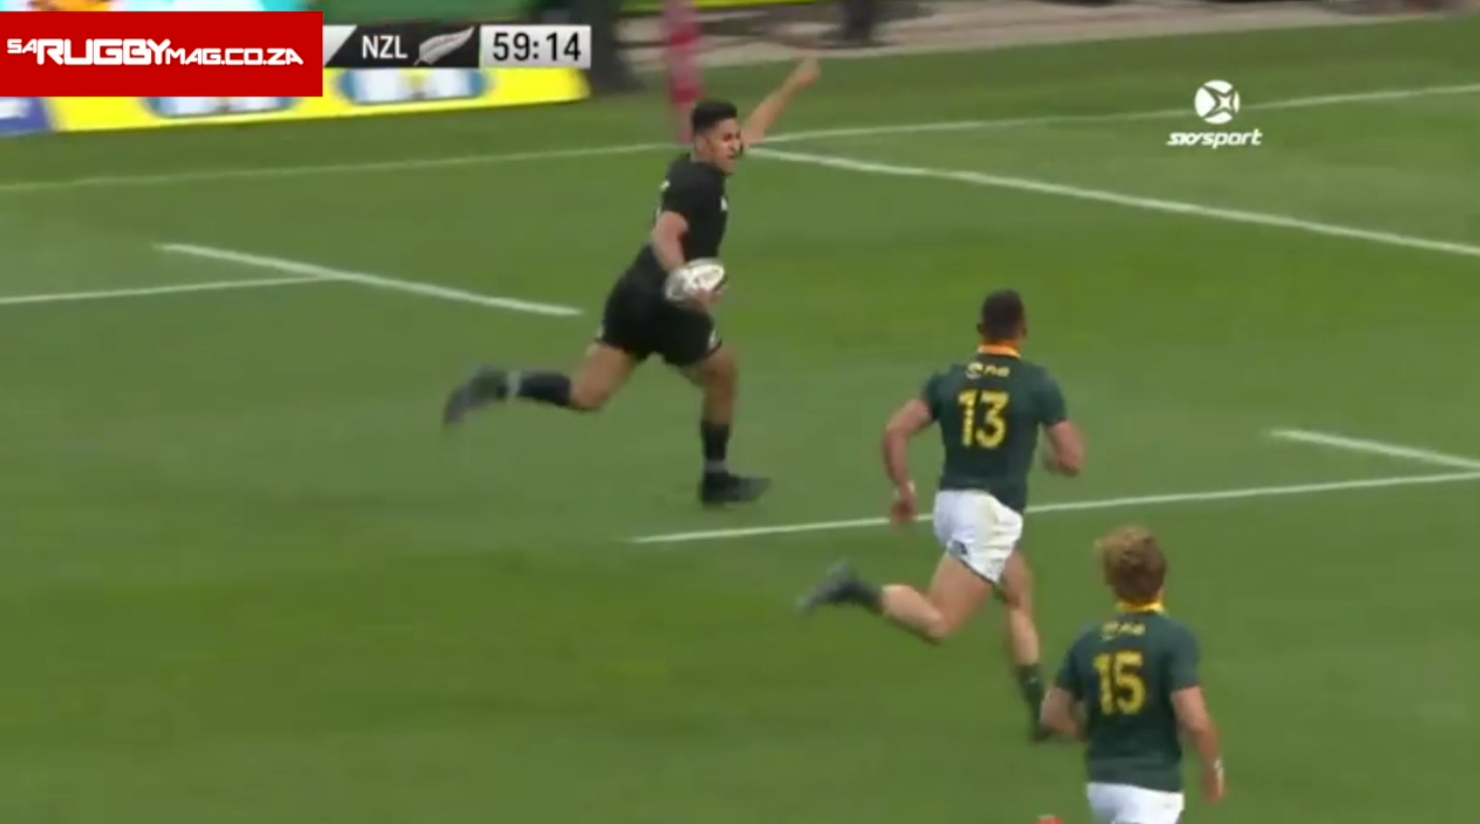 Watch: Expect Boks to lose big